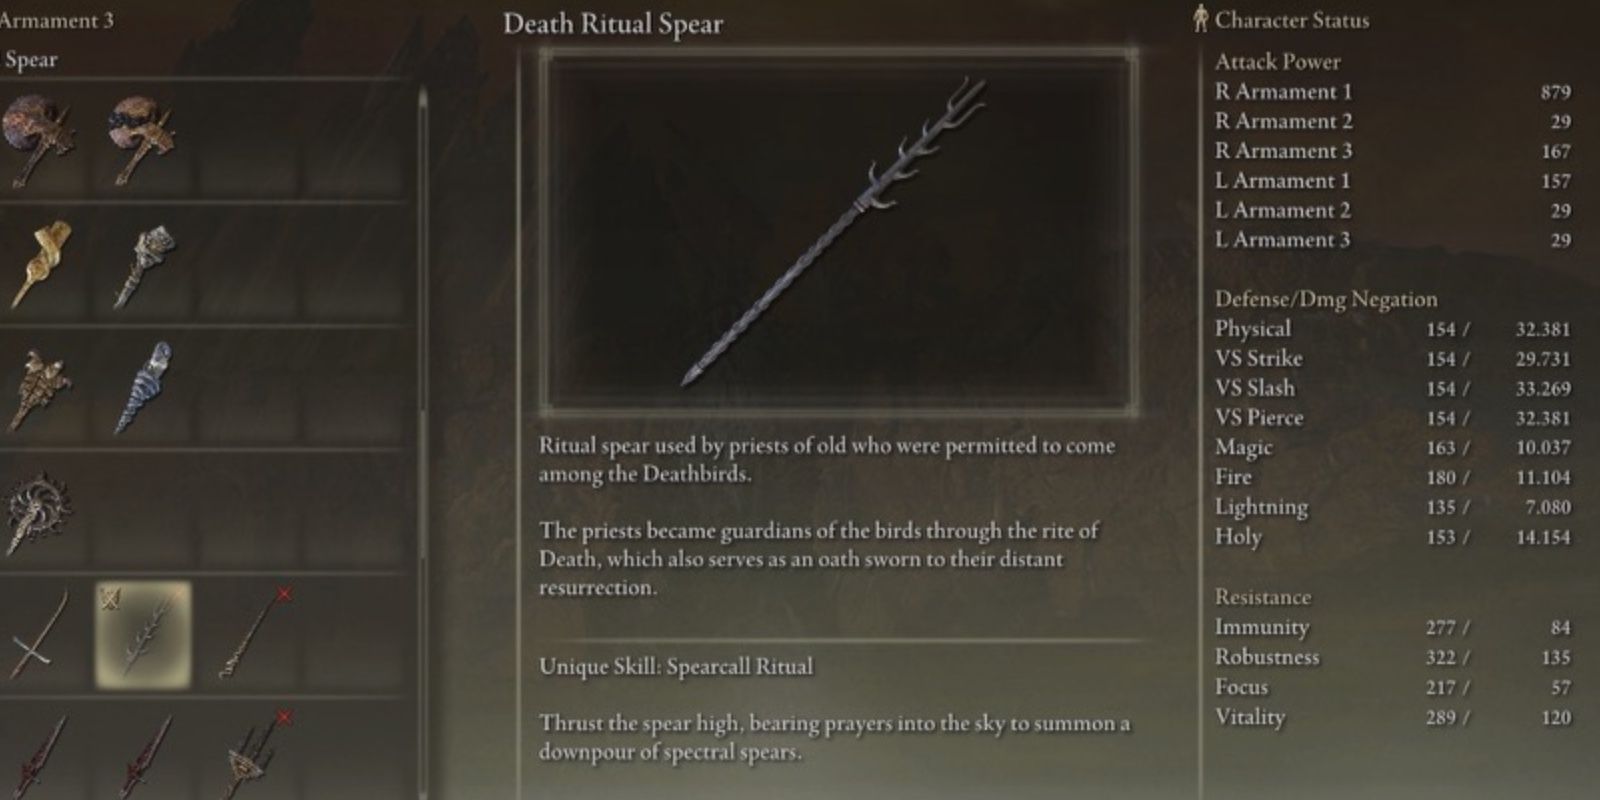 The Death Ritual Spear's item description and damage stats in the inventory in Elden Ring.